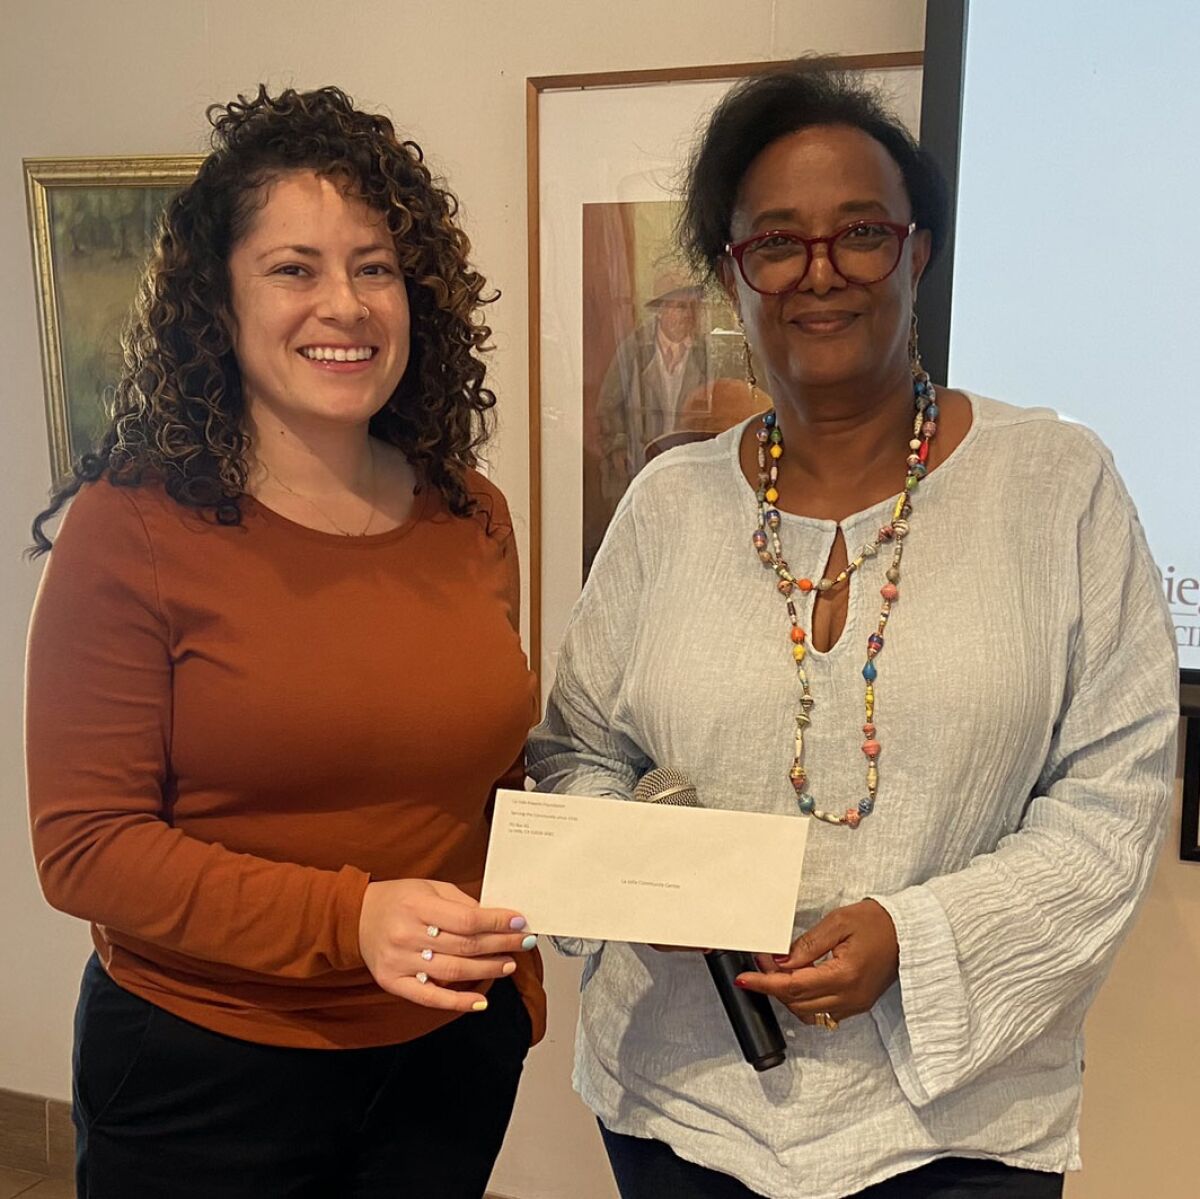 Debbie Miller (left) from the La Jolla Community Center receives a check for $8,000 from Kedest Behanu.